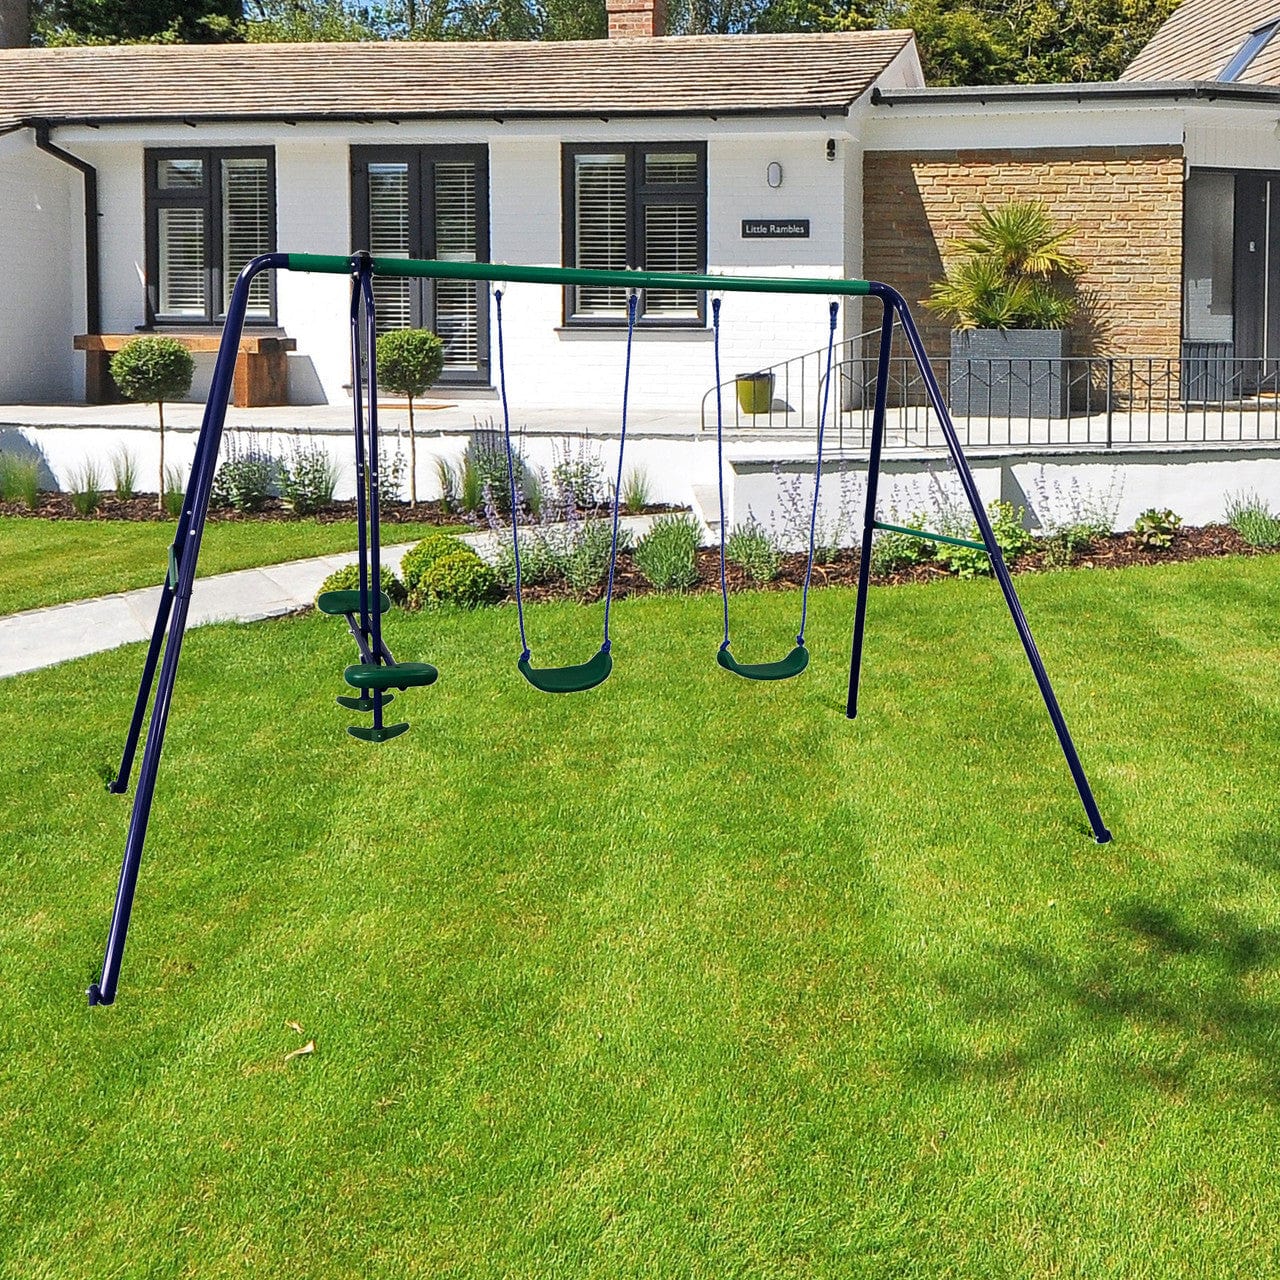 Aleko Outdoor Sturdy Child Swing Set with 2 Swings and 1 Glider - Blue and Green